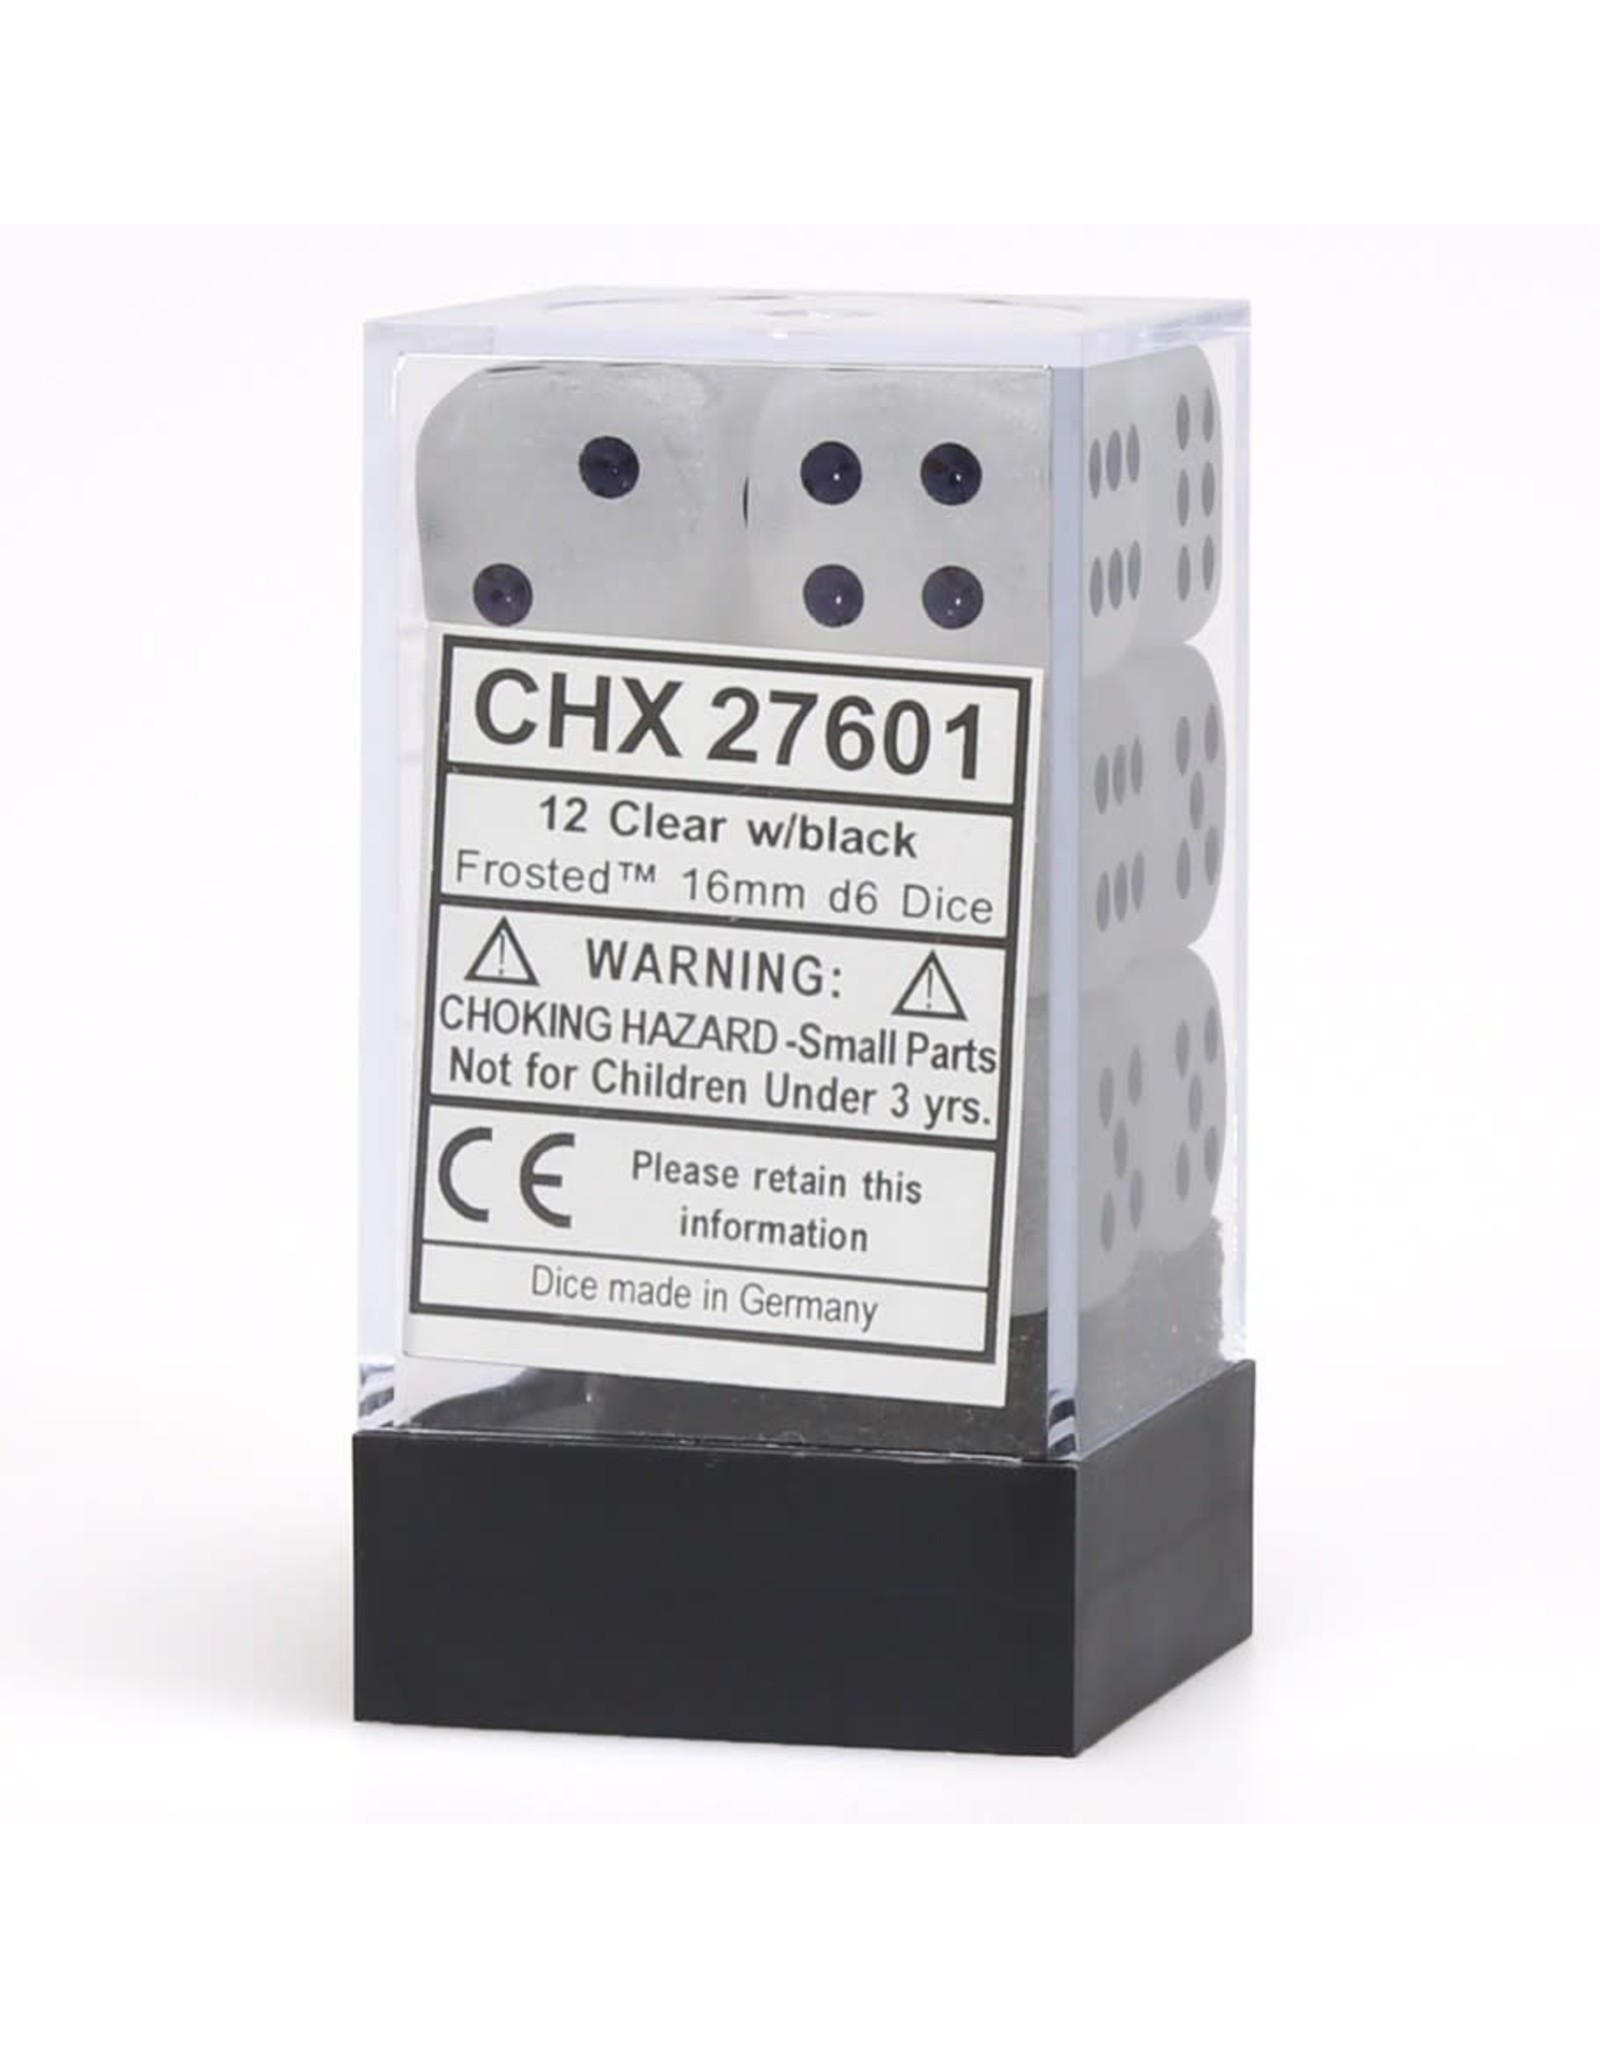 Chessex Frosted 16mm d6 Clear/black Dice Block (12 Dice Set)